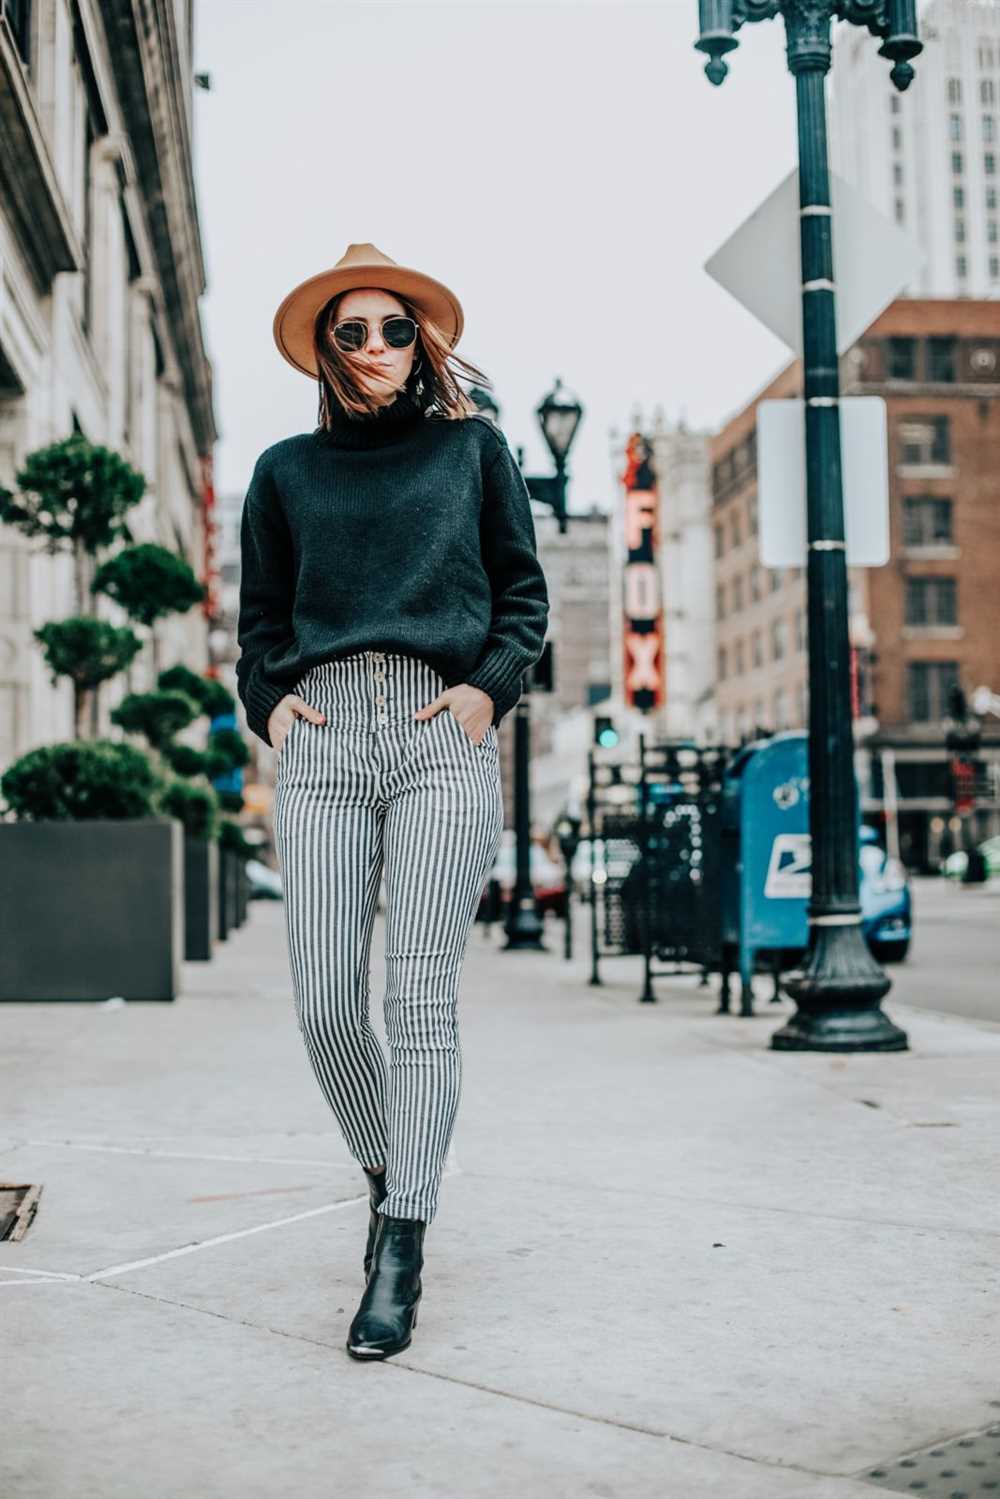 Dressing up for special occasions with black and white striped pants